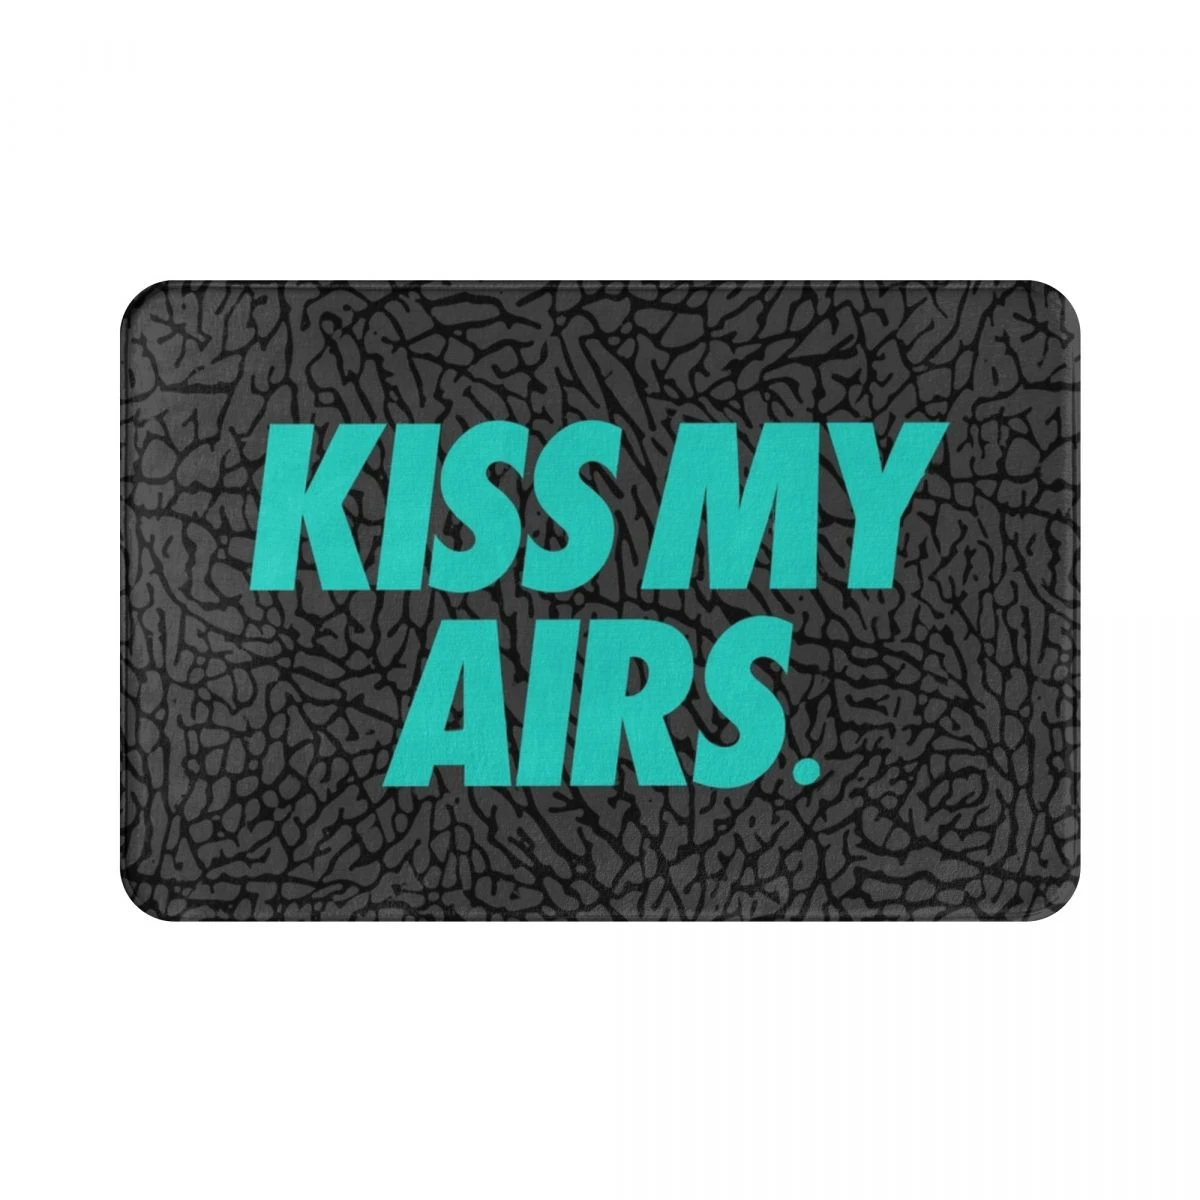 KISS MY AIRS Polyester Doormat Rug carpet Mat Footpad Non slip Water oil  proof Entrance Kitchen Bedroom balcony toilet 40*60cm|Mat| - AliExpress